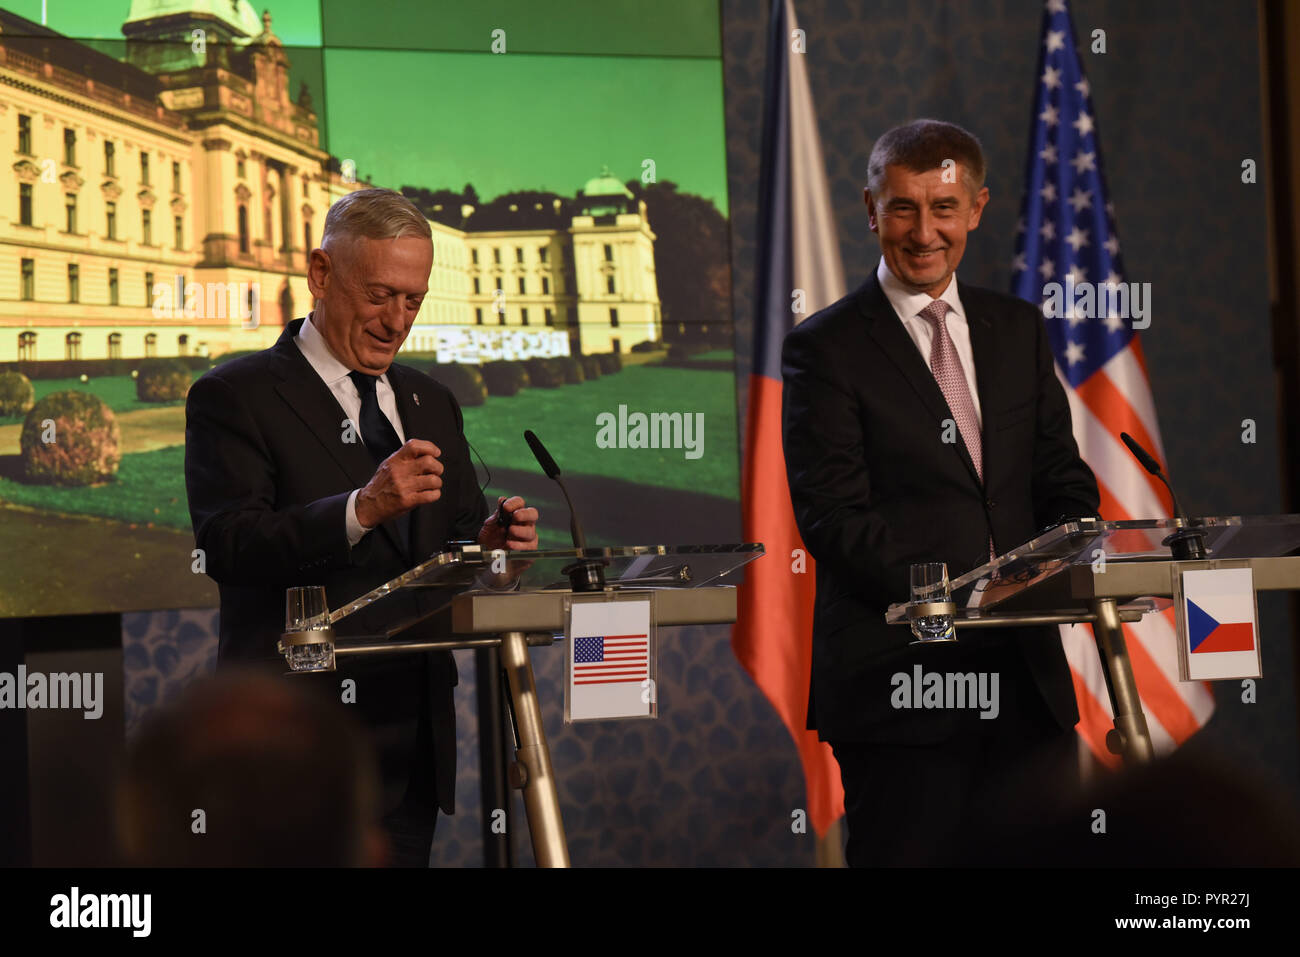 U.S. Secretary of Defense James N. Mattis and Czech Prime Minister Andrej Babis hold a joint press conference at the prime minister’s office in Prague, Czech Republic, Oct. 28, 2018. (DOD photo by Lisa Ferdinando) Stock Photo